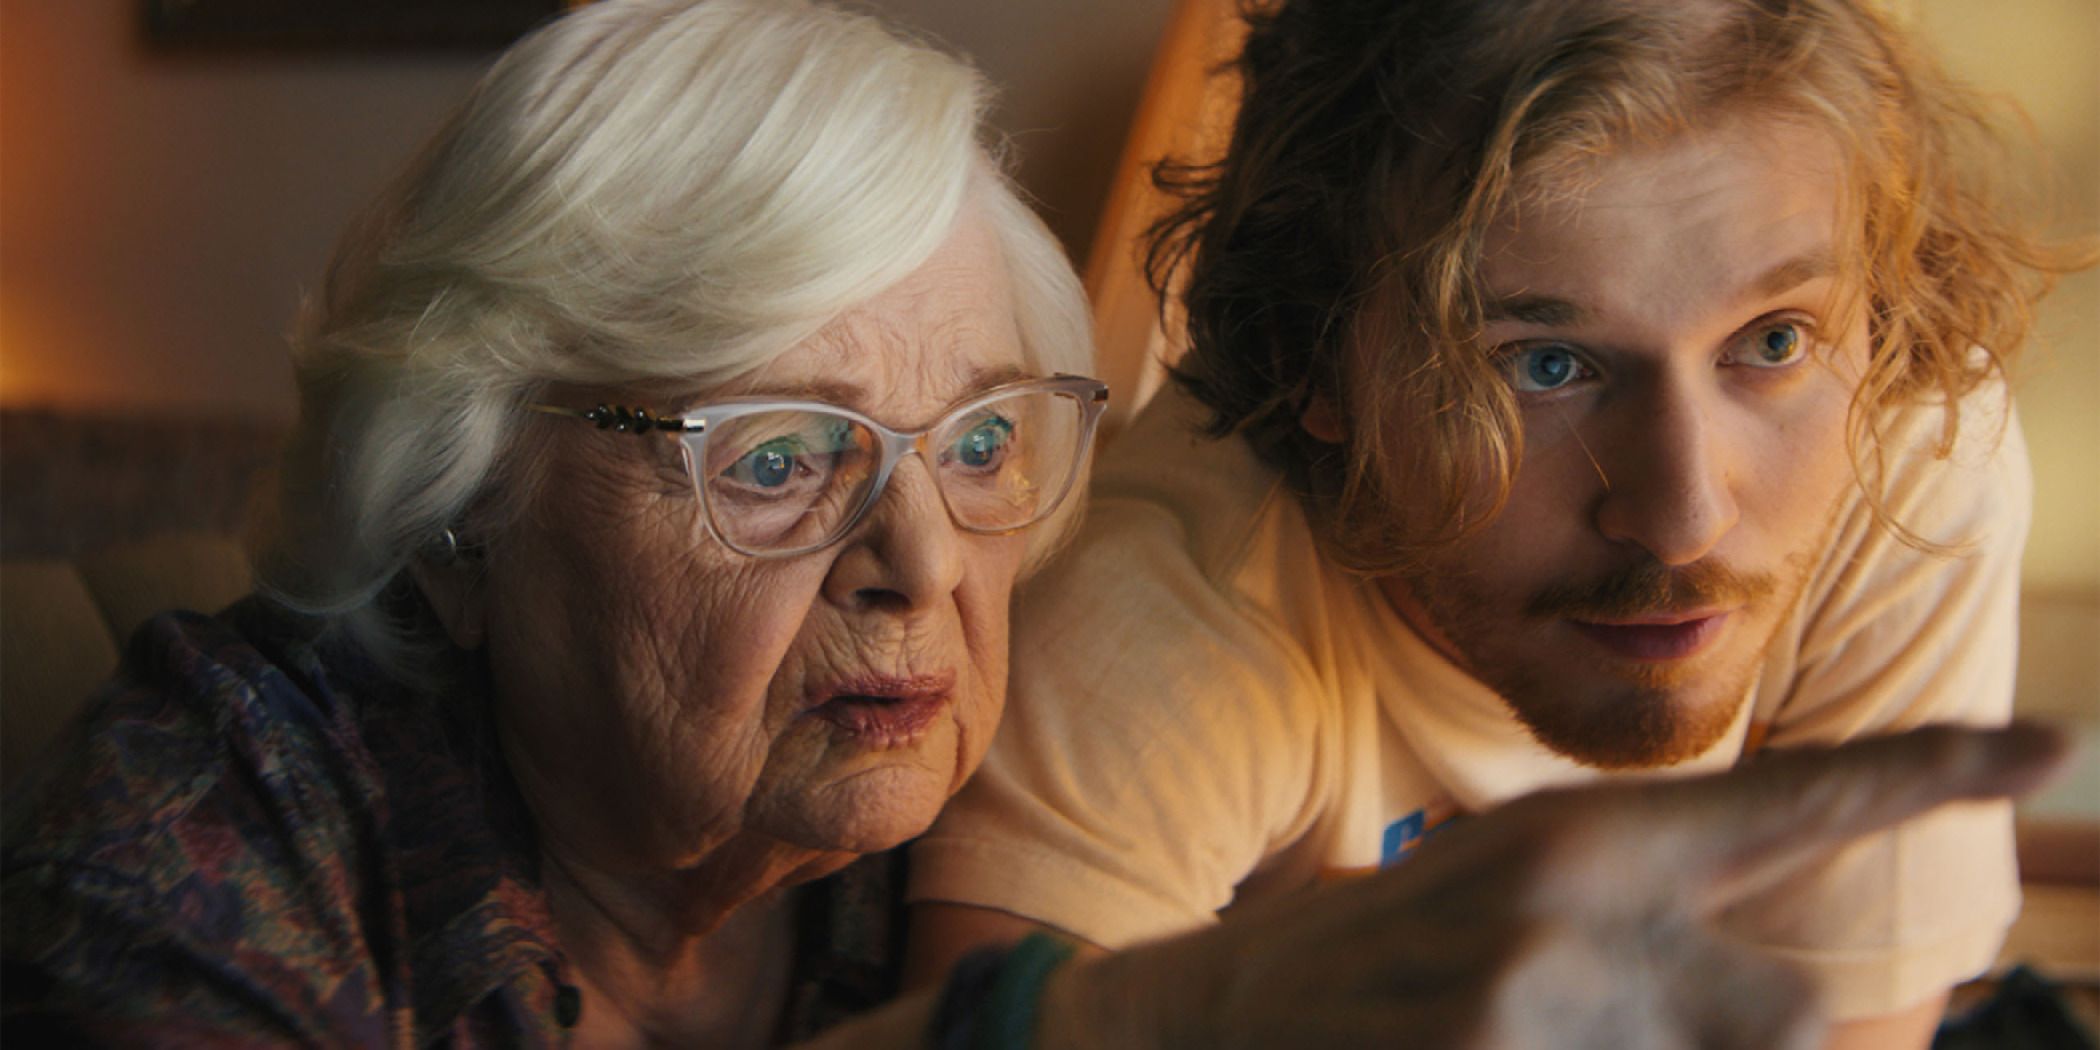 June Squibb (left) and Fred Hechinger (right) studying something on a computer screen in Thelma for Sundance 2024